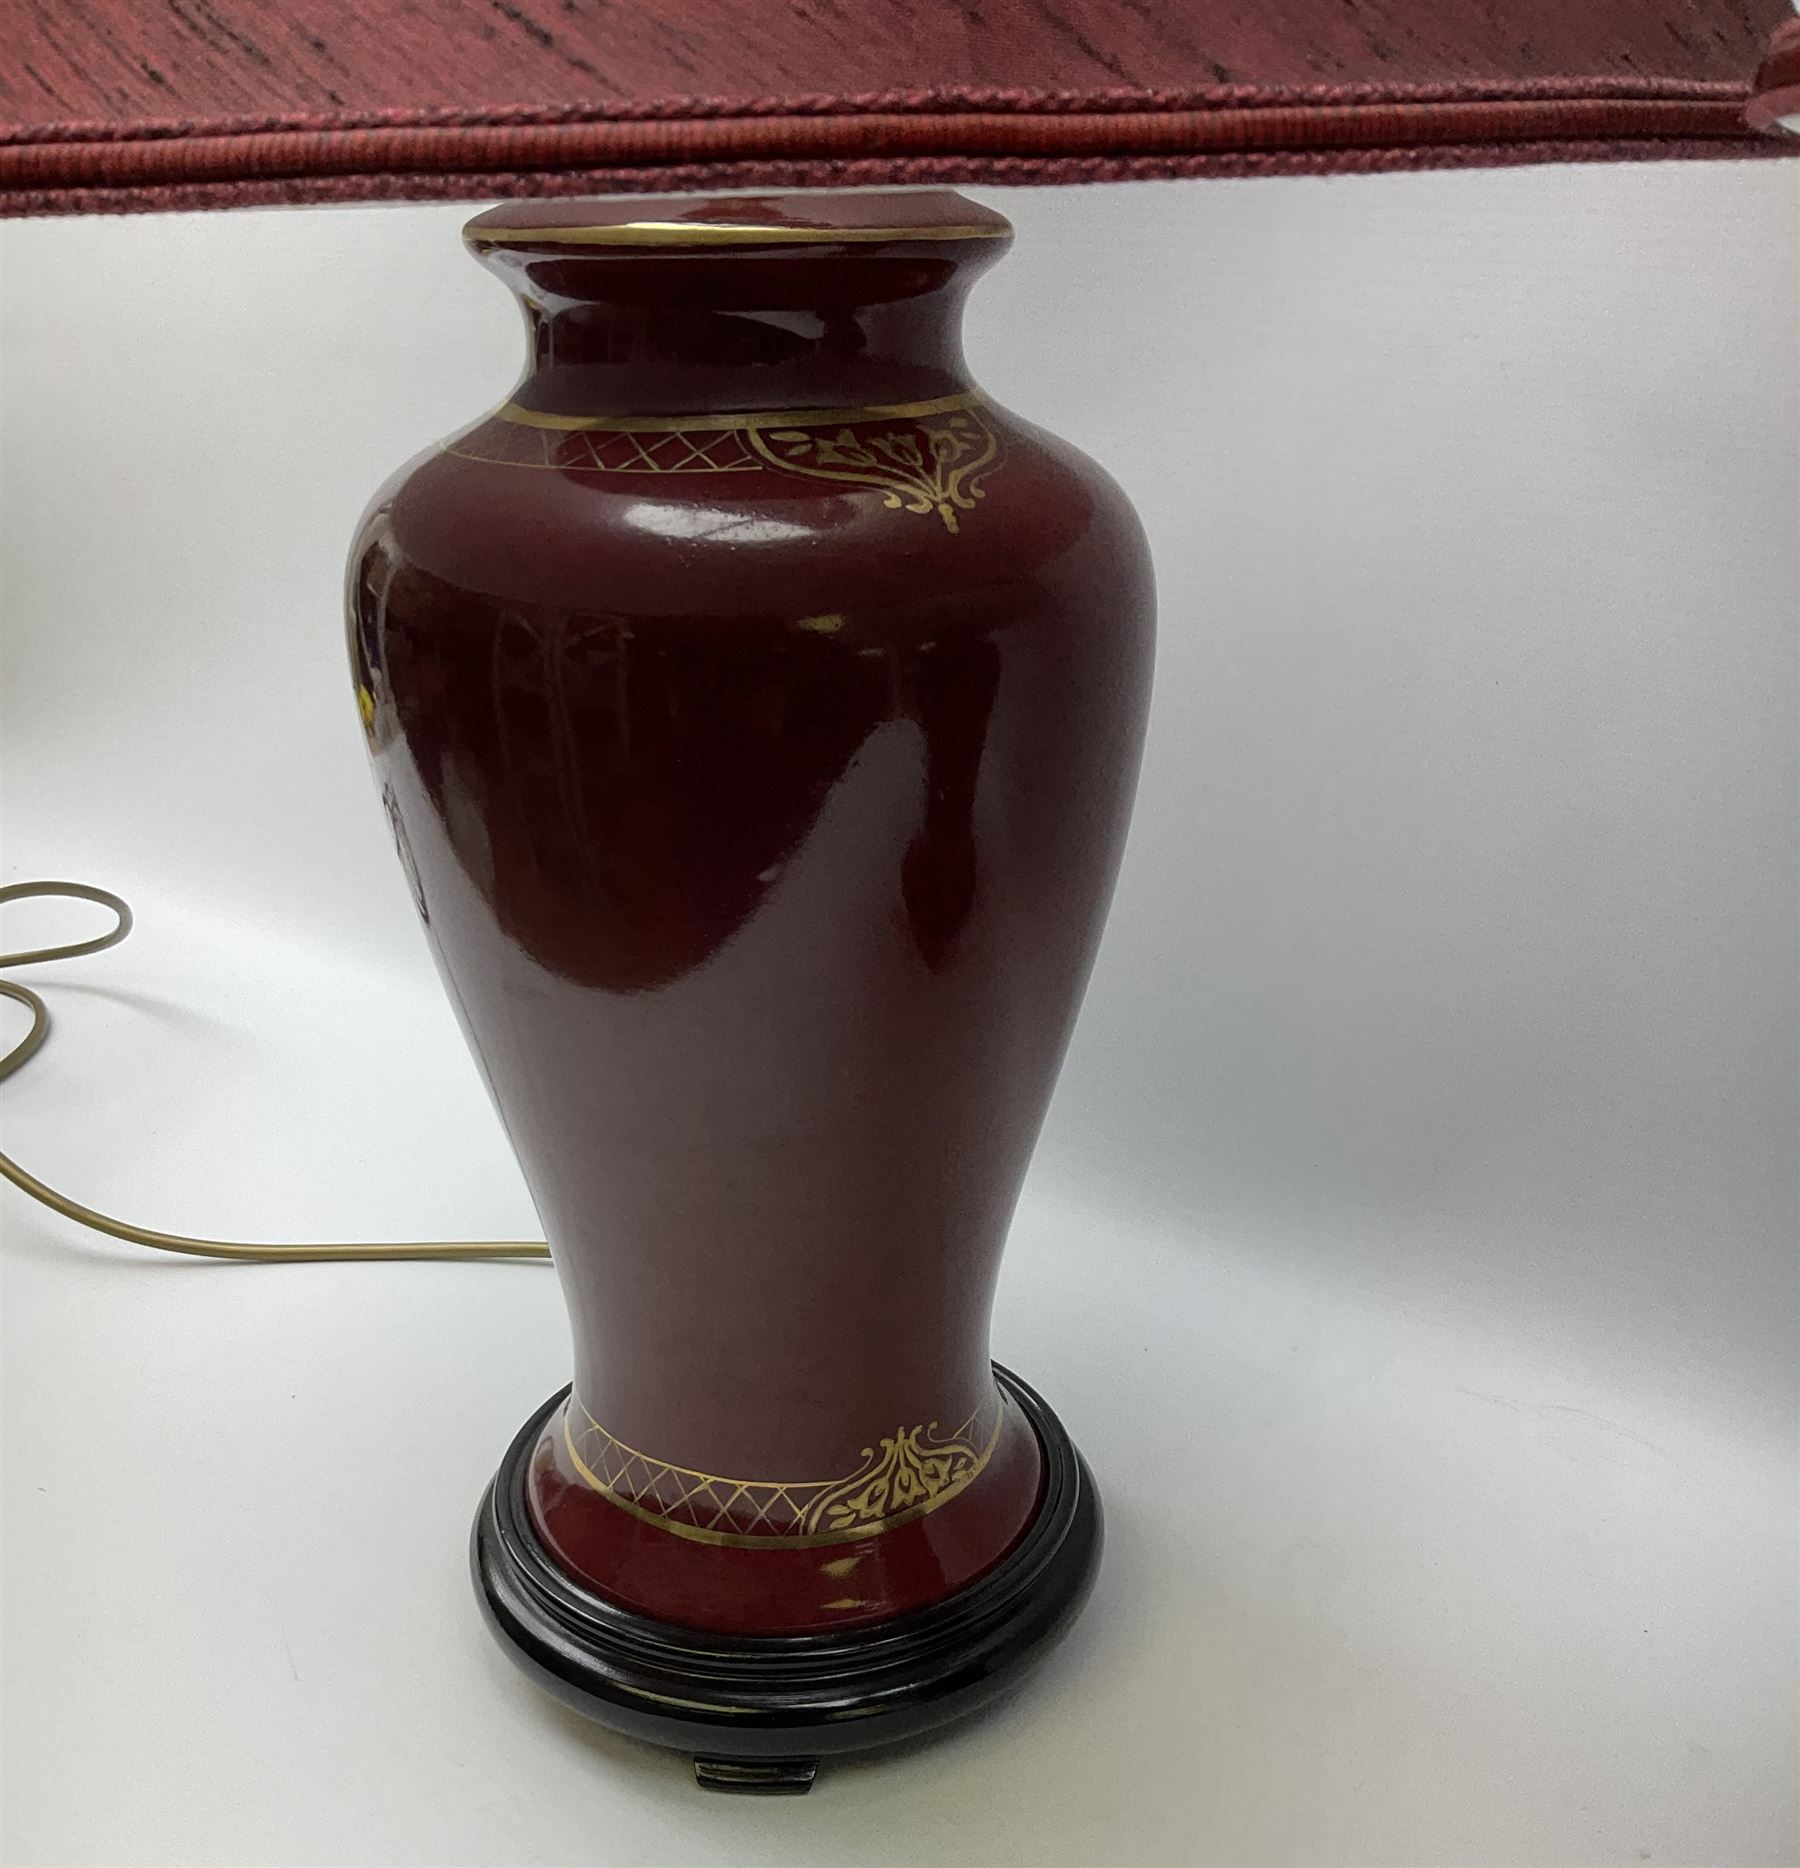 Pair of dark red table lamps in baluster form with a round wooden base - Image 5 of 6